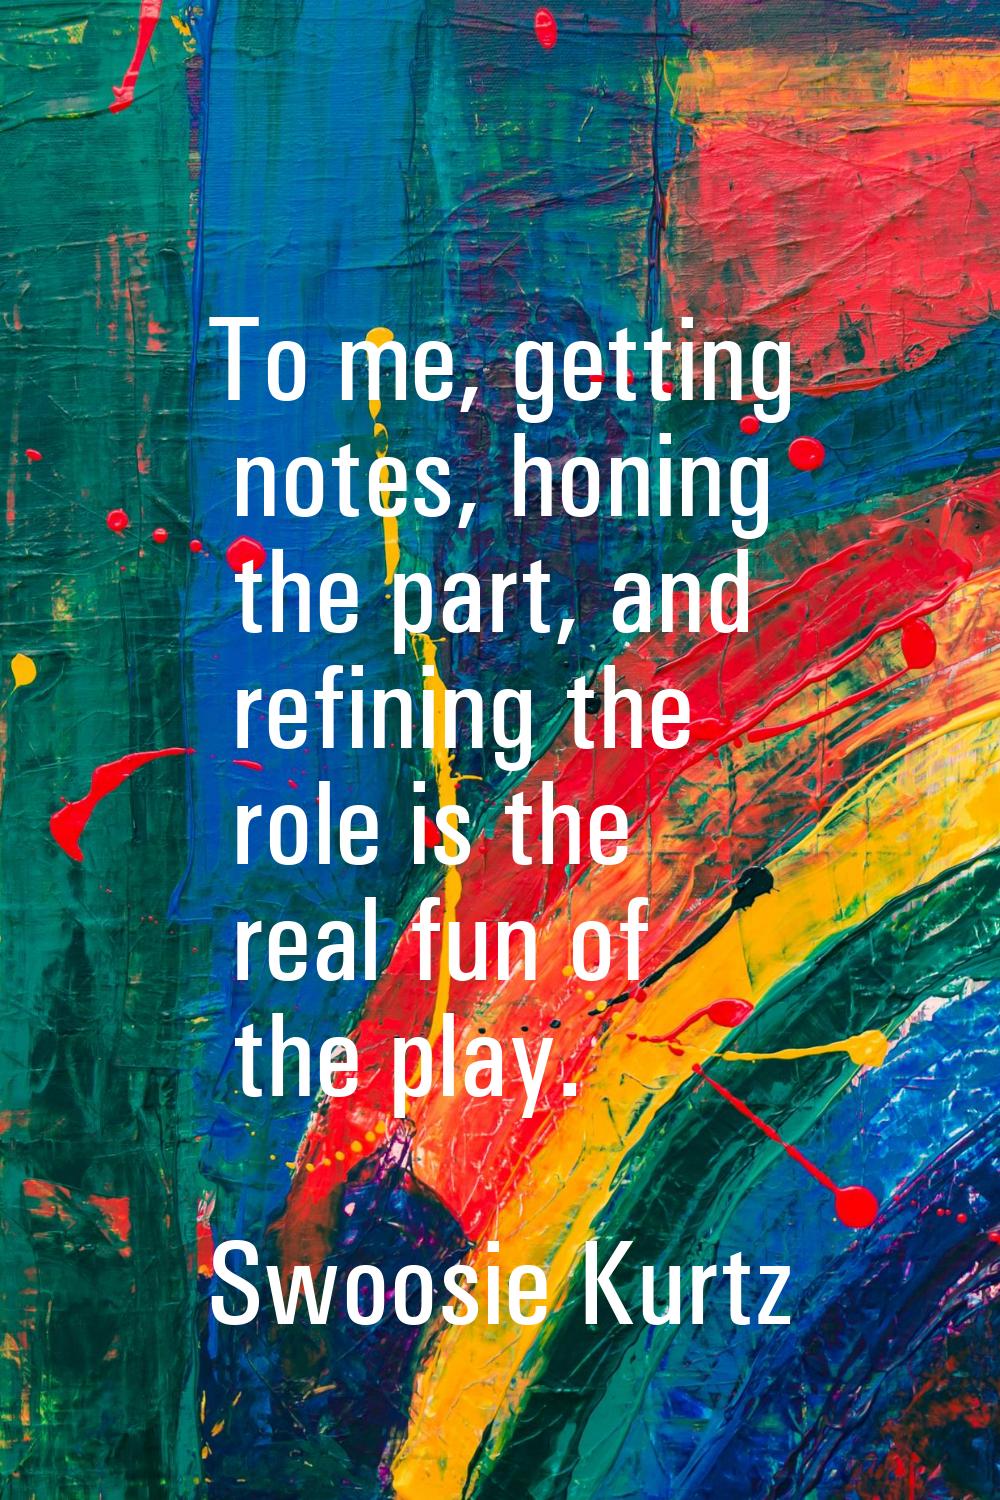 To me, getting notes, honing the part, and refining the role is the real fun of the play.